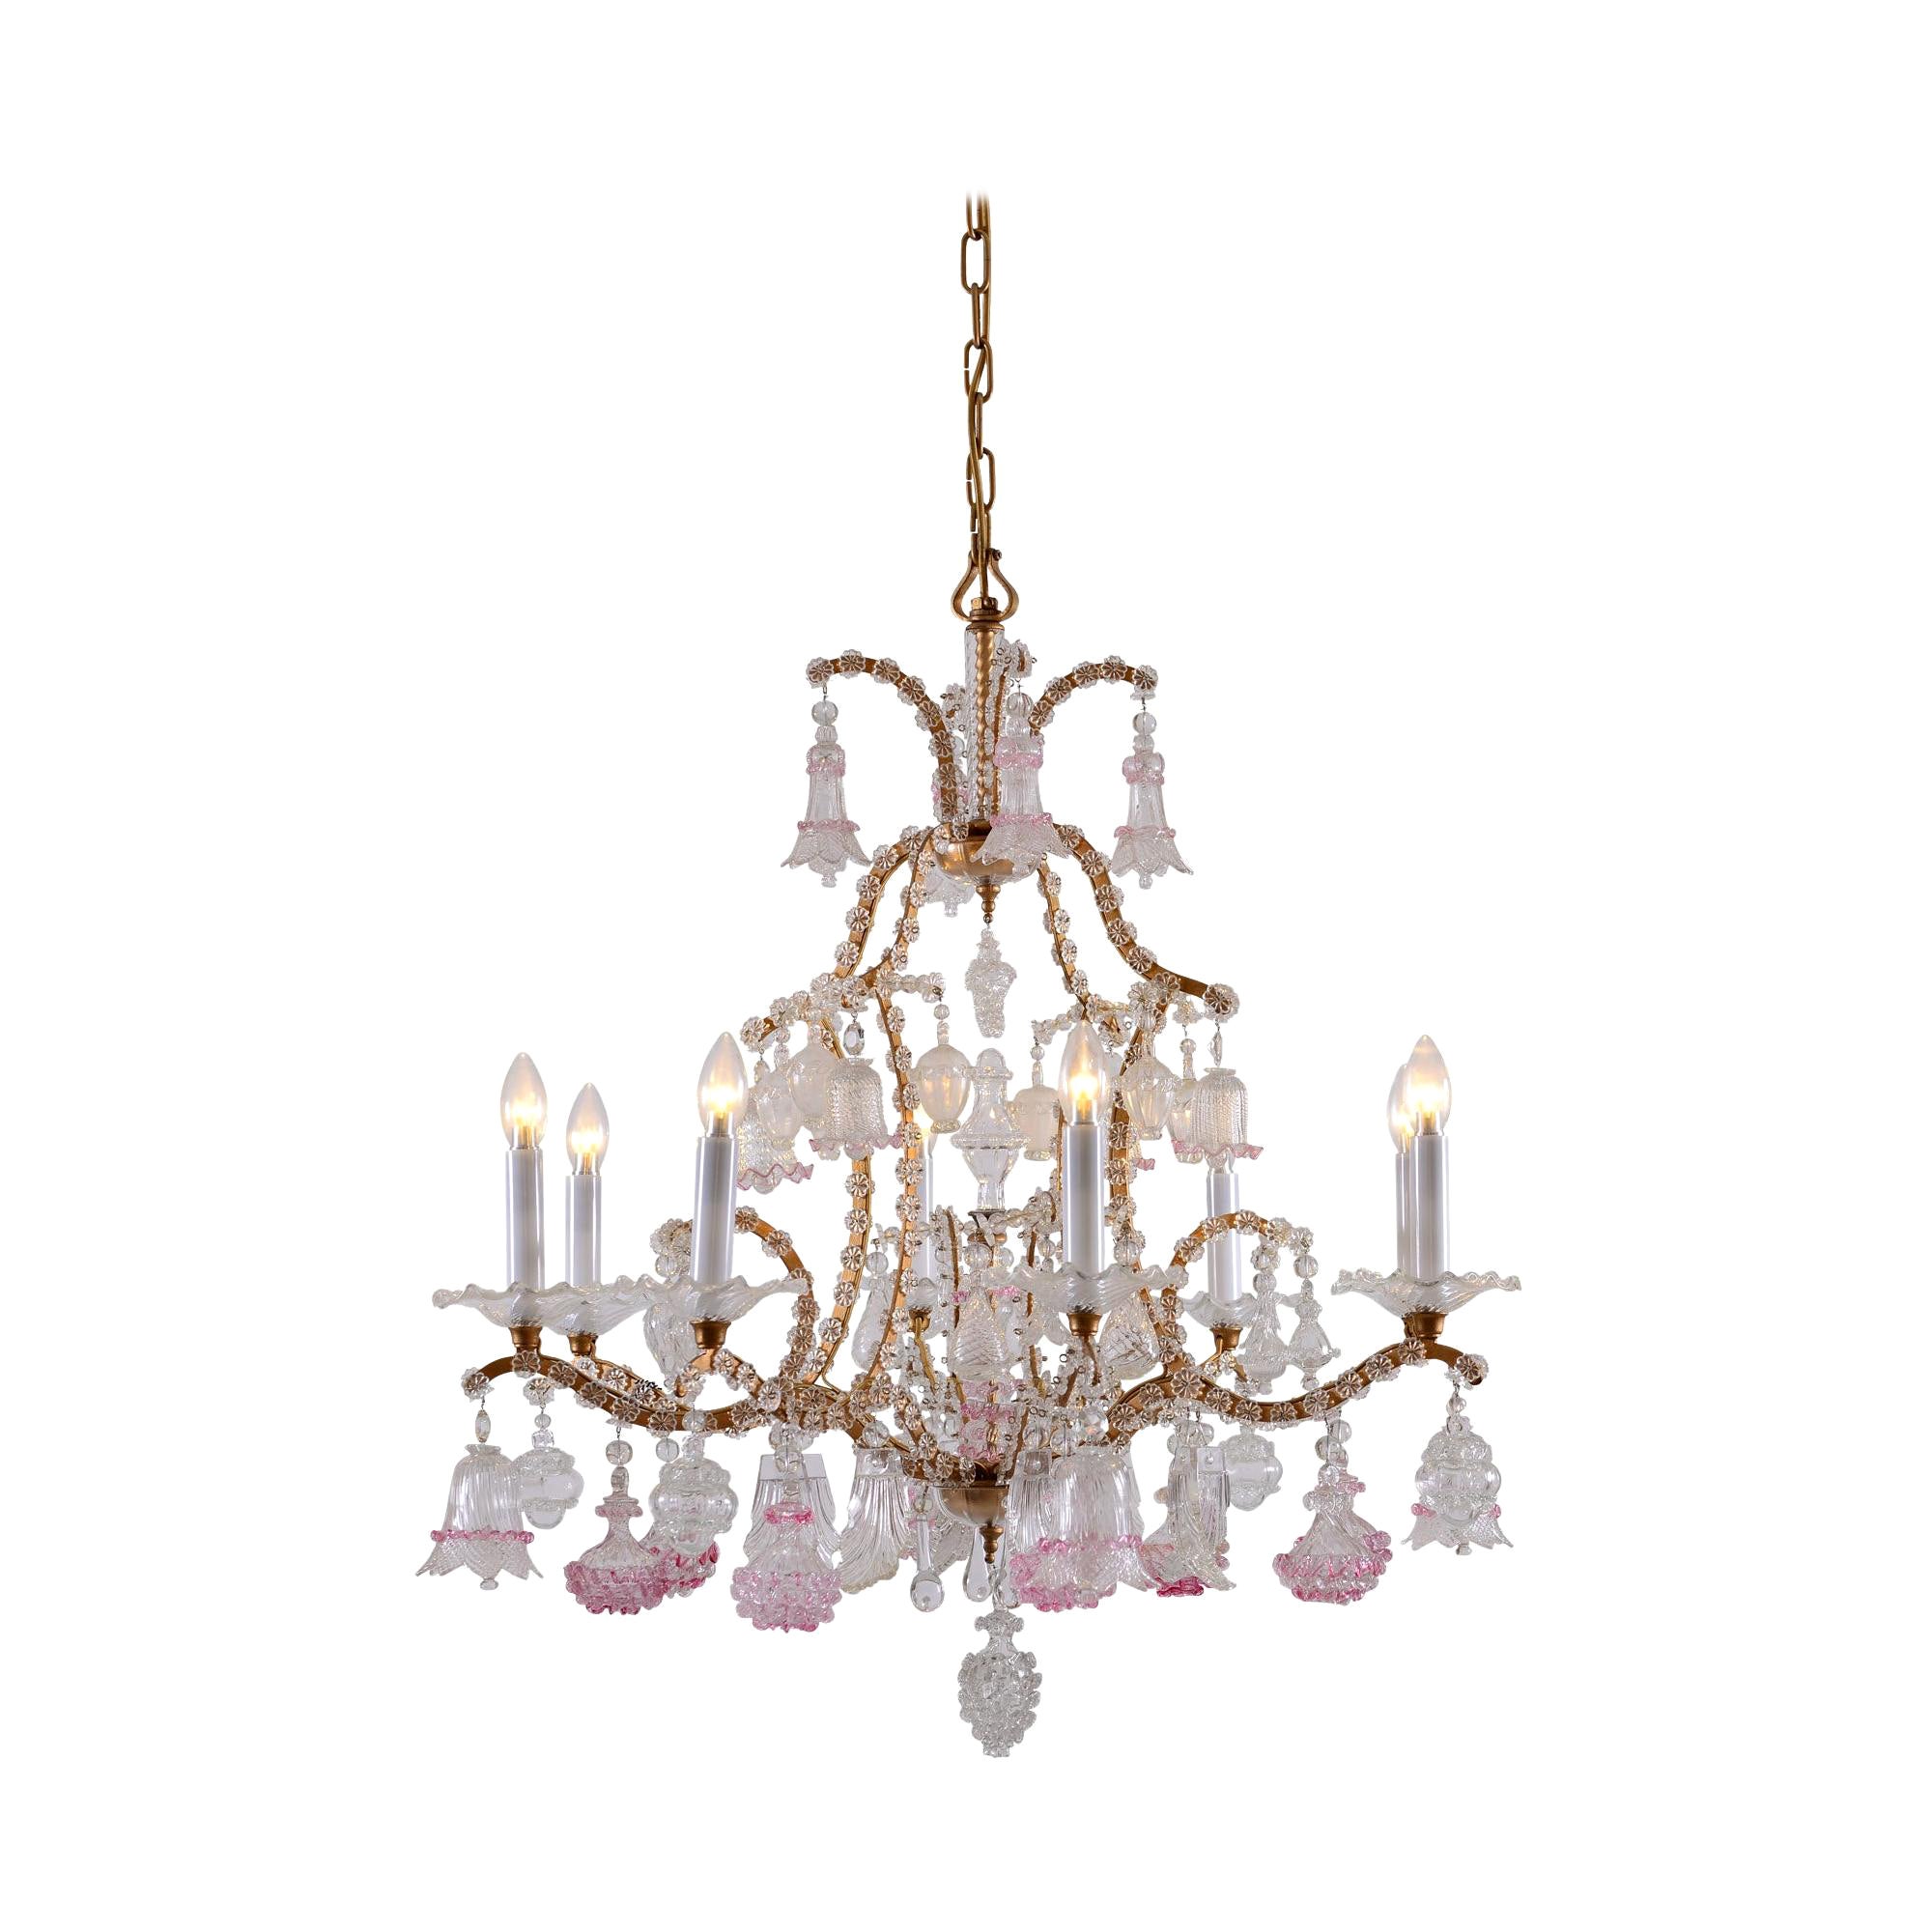 Beautiful Original Maria Theresia Chandelier in the Baroque Style from 1880